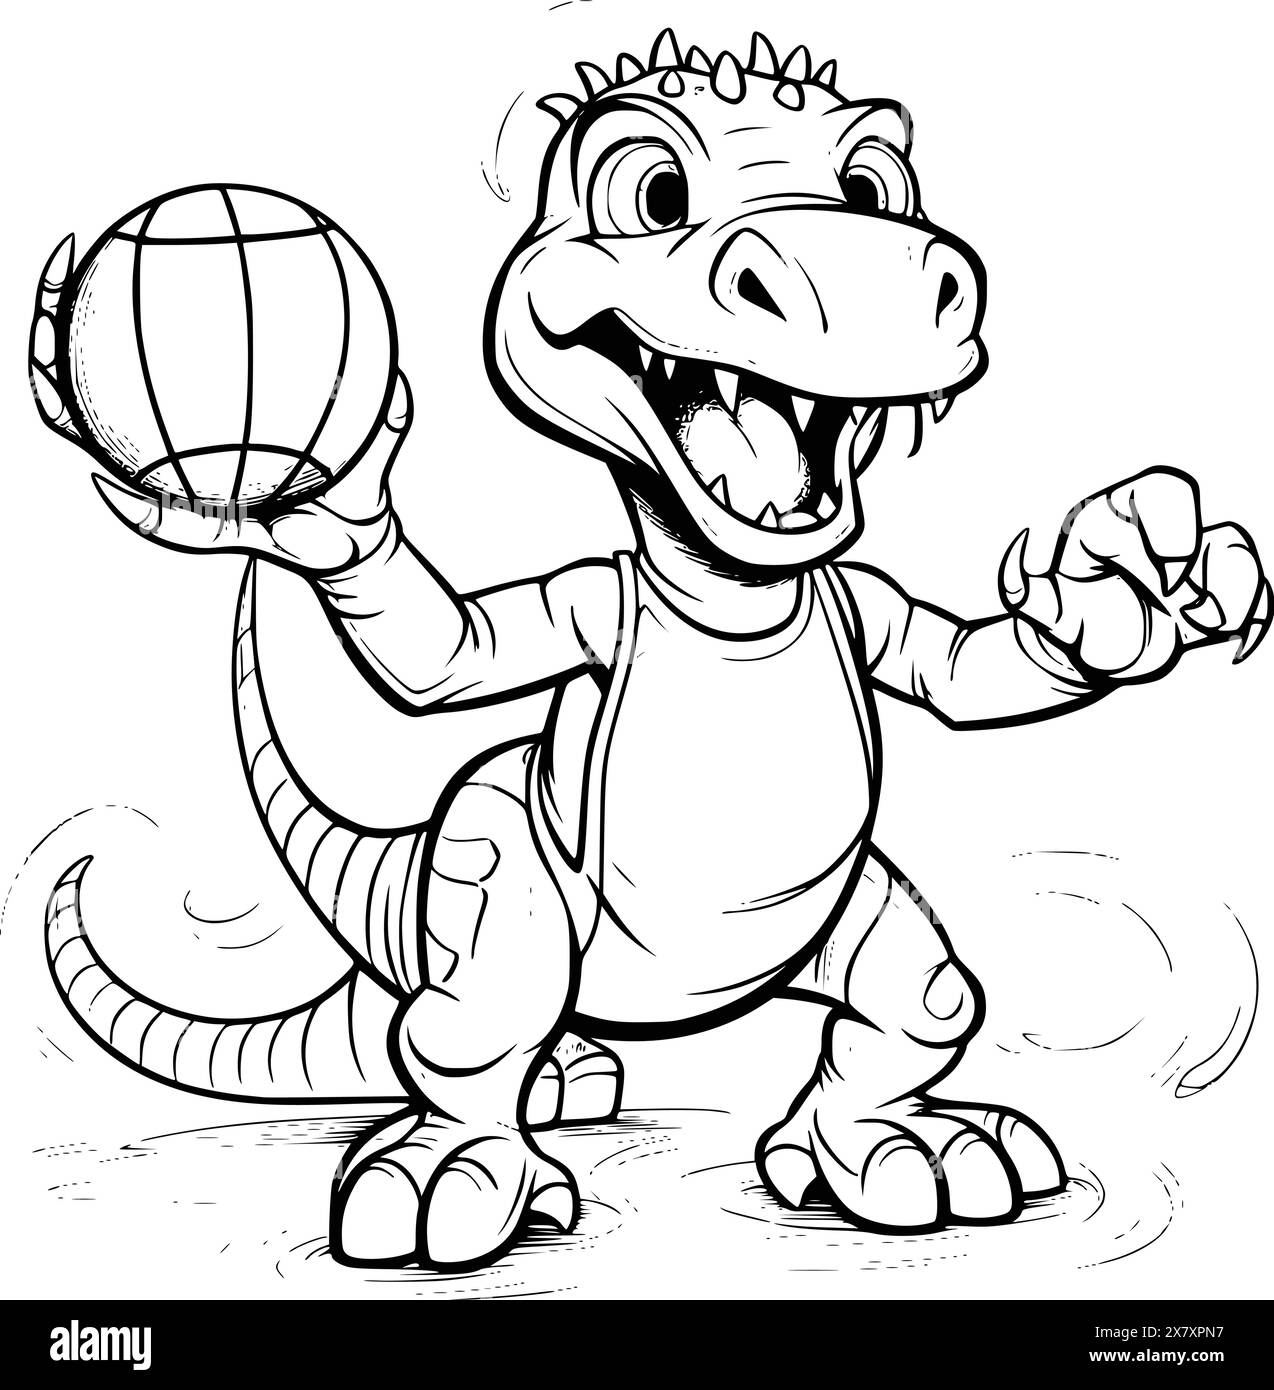 Dinosaur Is Playing Basketball Coloring Pages for Kids Stock Vector